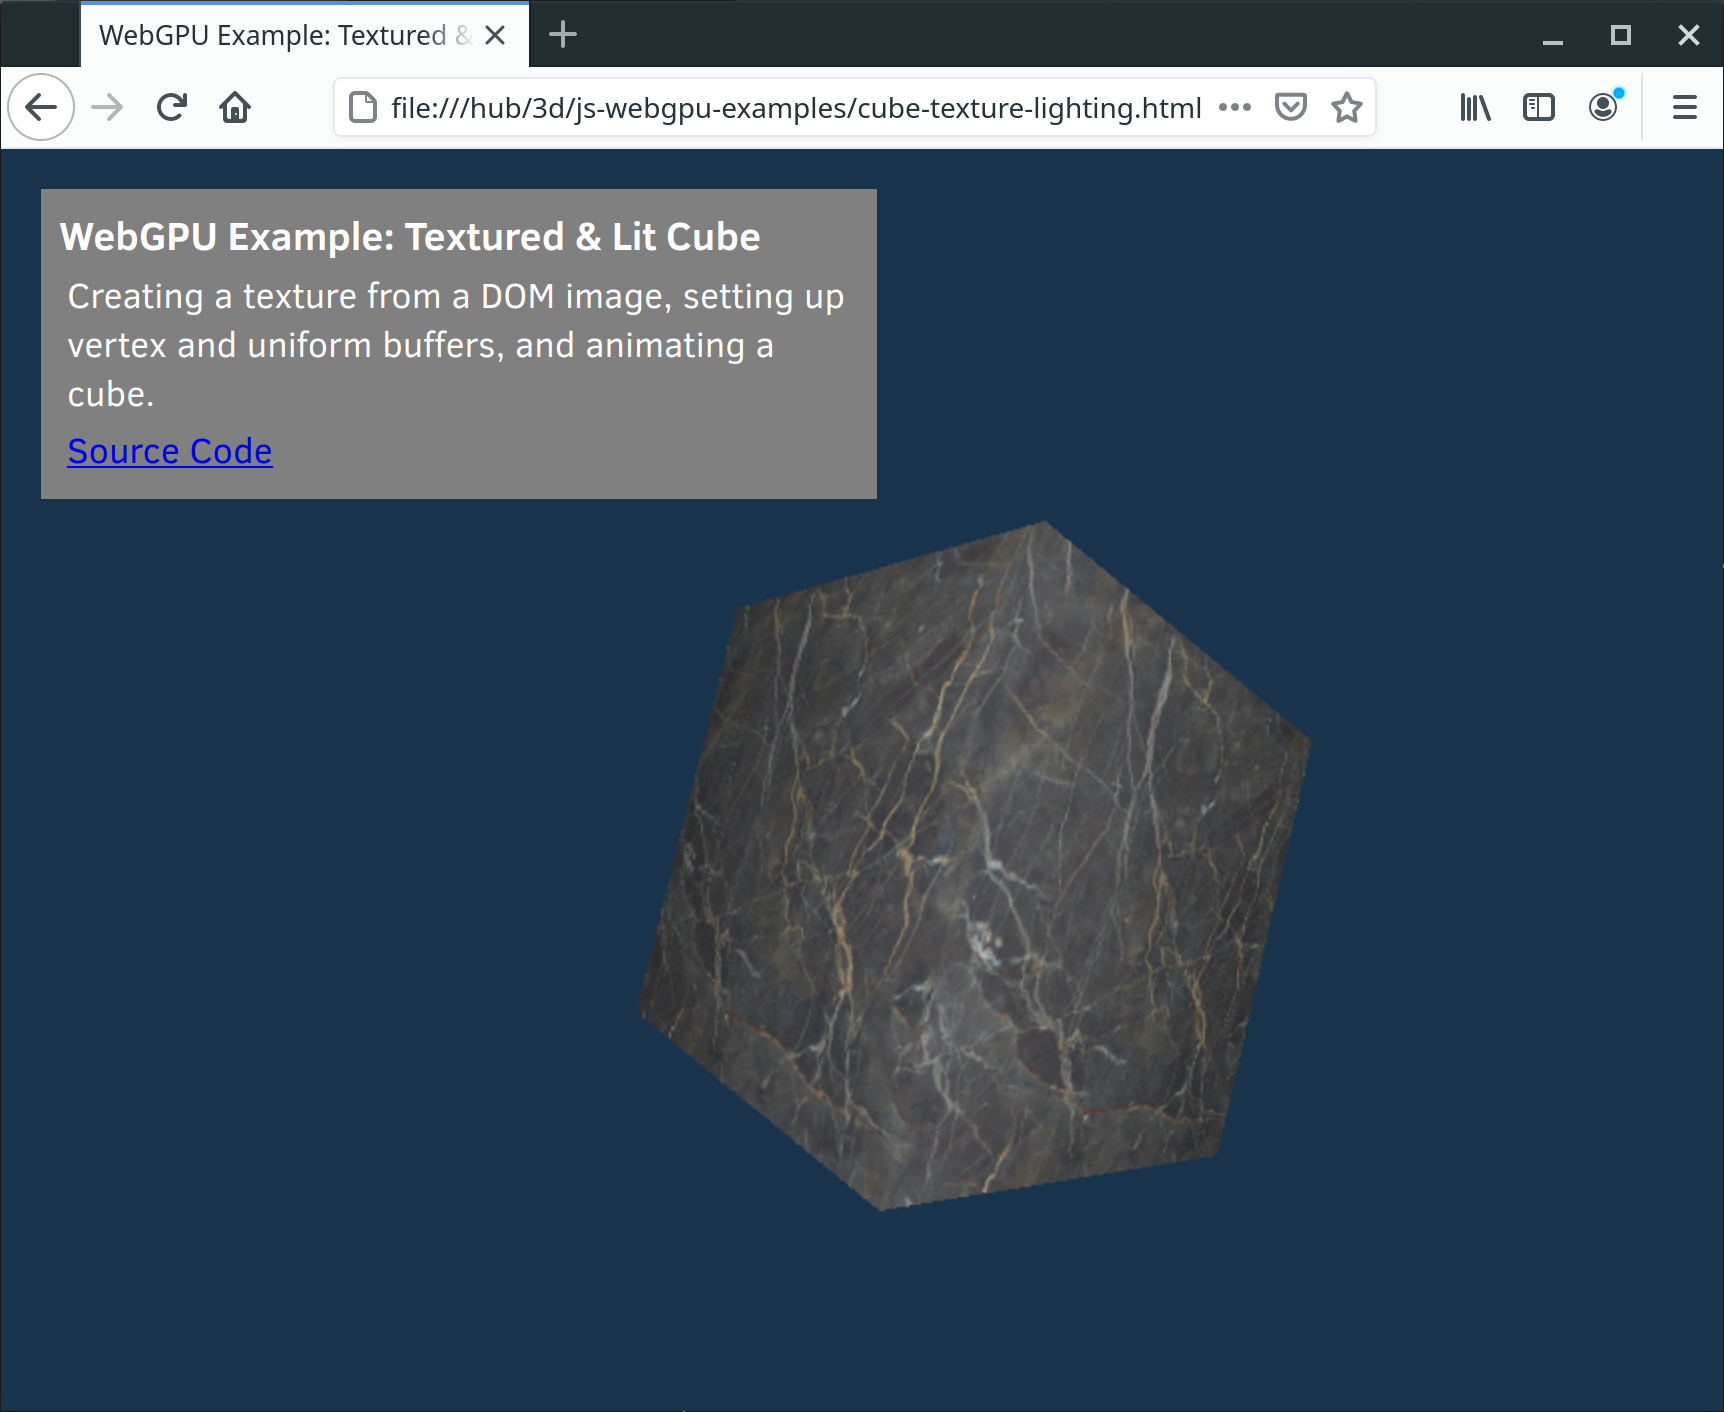 WebGPU textured+lit cube in Firefox Nightly with WGSL shaders.